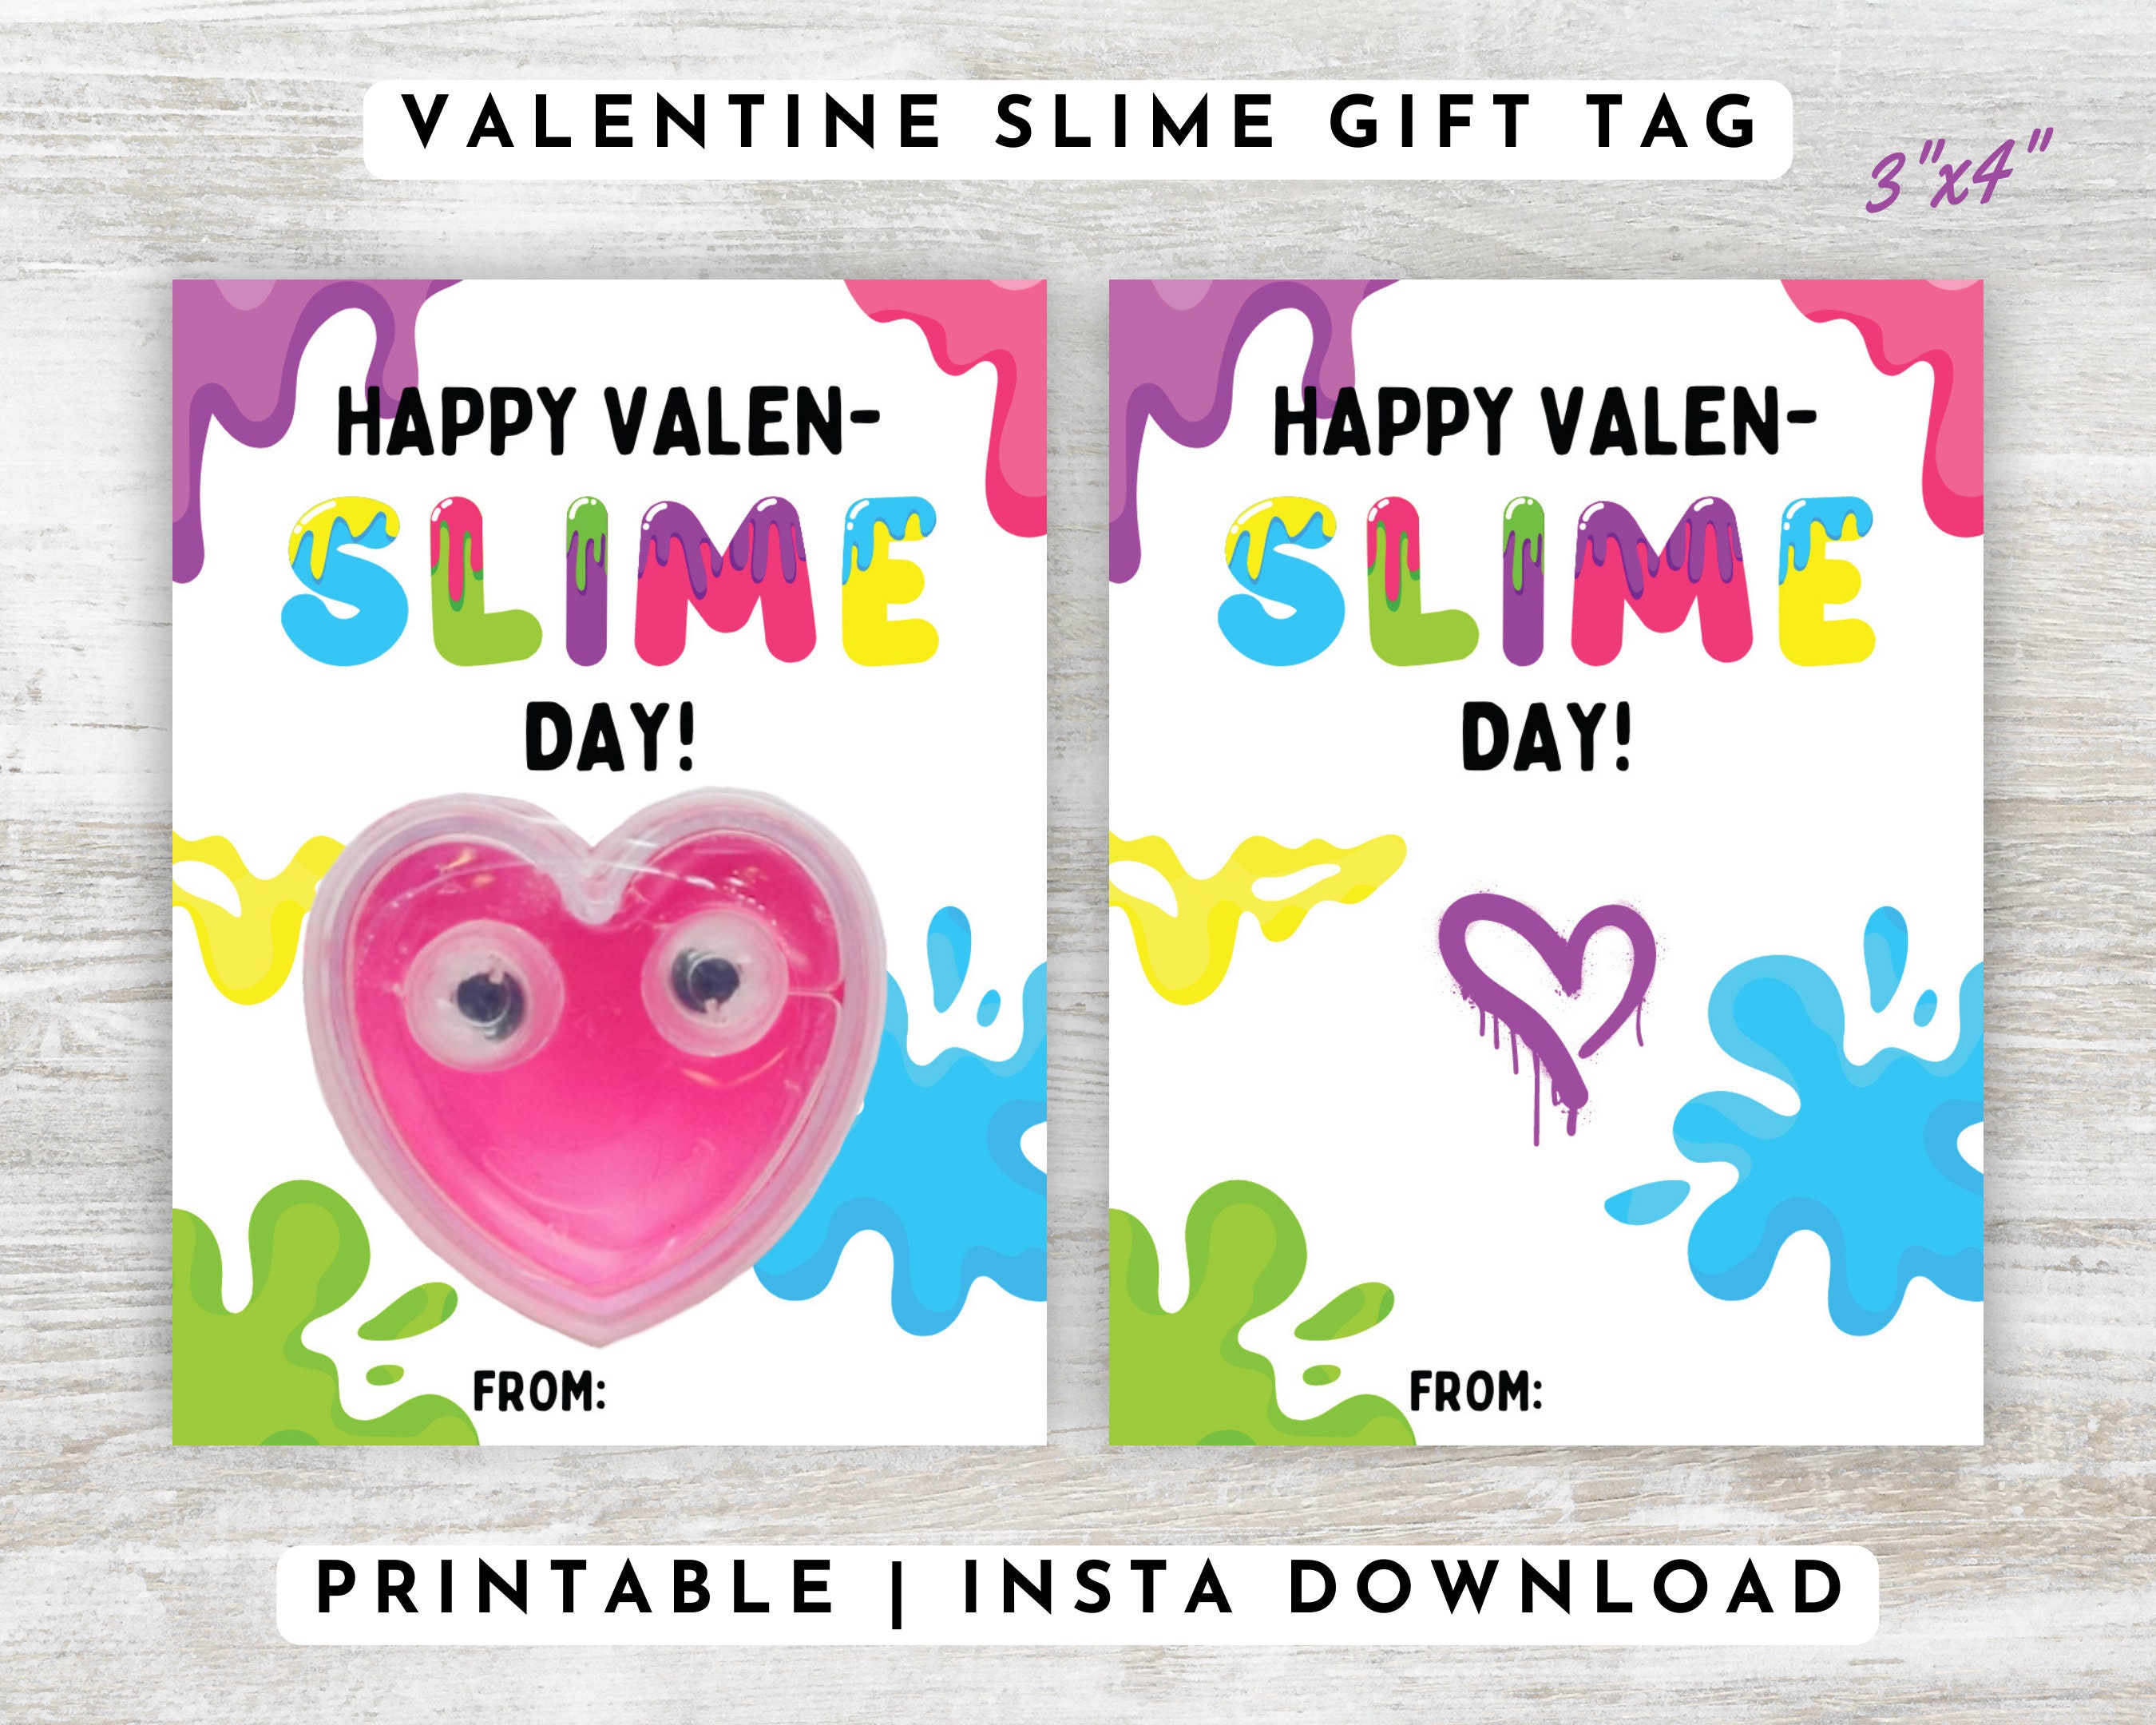  OHOME Valentines Stickers - 180 PCS Valentines Day Stickers for  Kids Classroom School -Vinyl Heart Stickers - Valentines Crafts for Kids -  Valentines Gifts Treats Decor Cards Scrapbooking Party Favors : Toys & Games